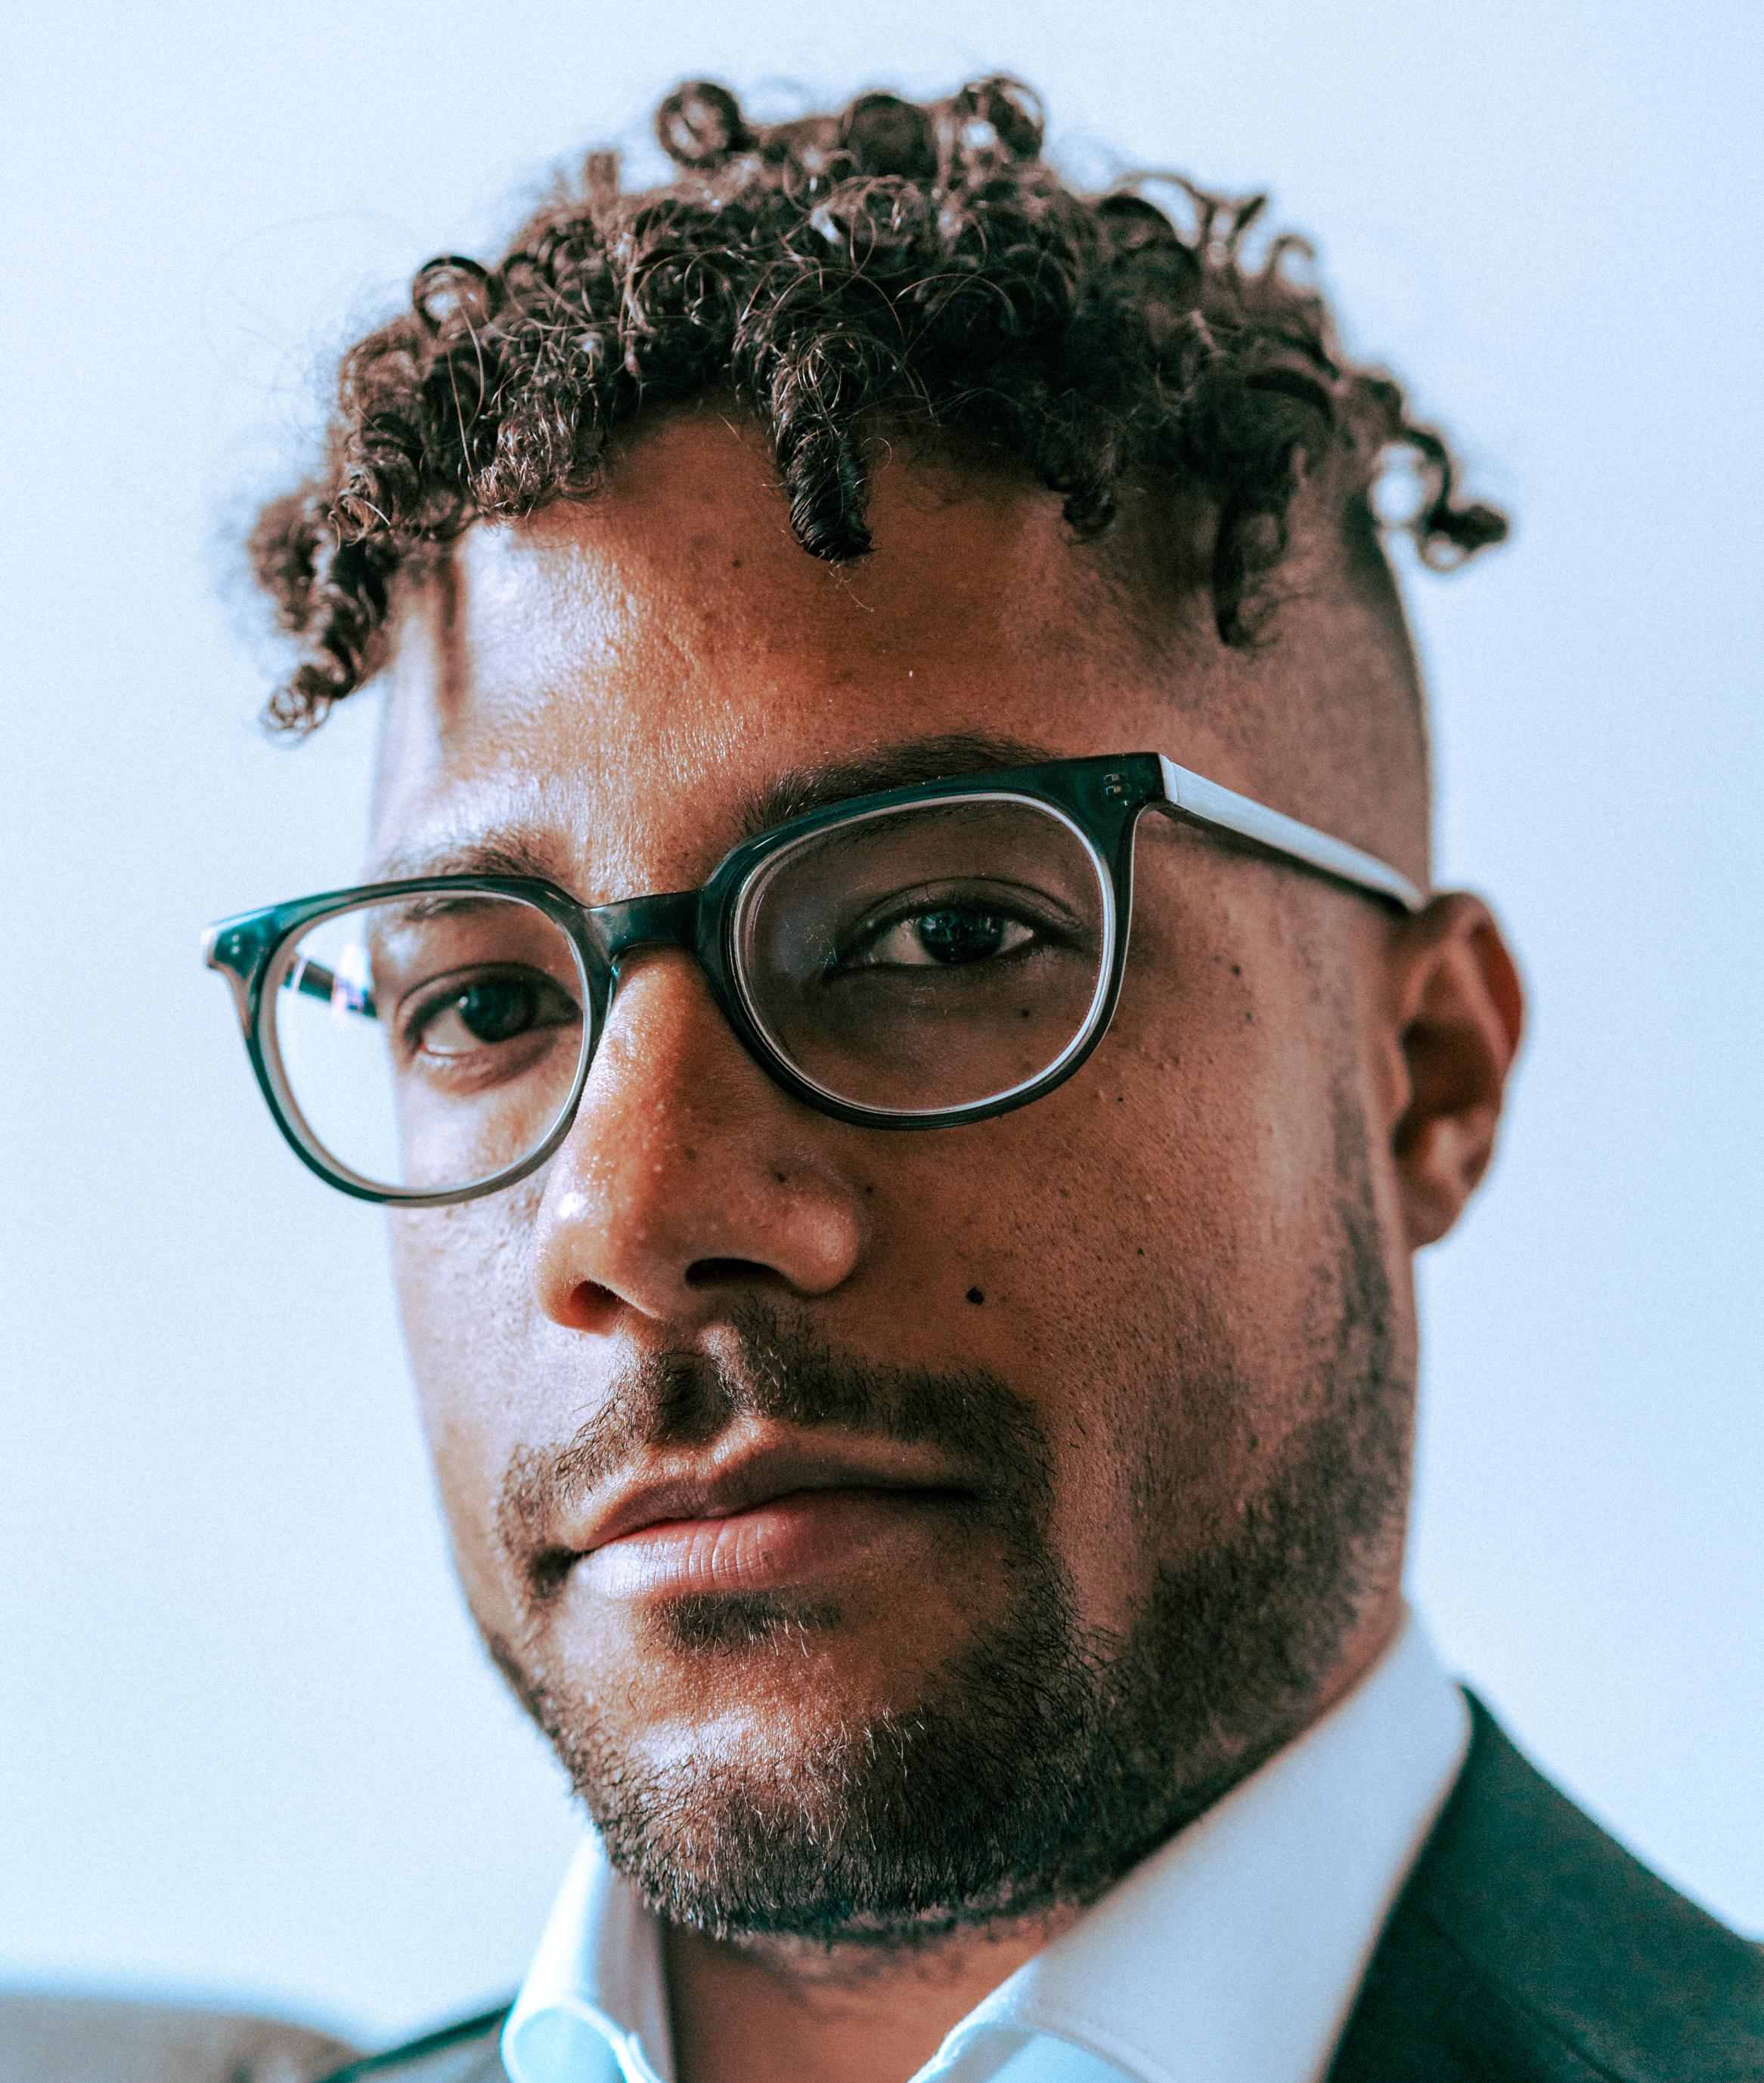 Mateo Askaripour, author of the acclaimed novel Black Buck, will visit SUNY Oswego for a presentation and to lead a community discussion of racial justice in the workplace.